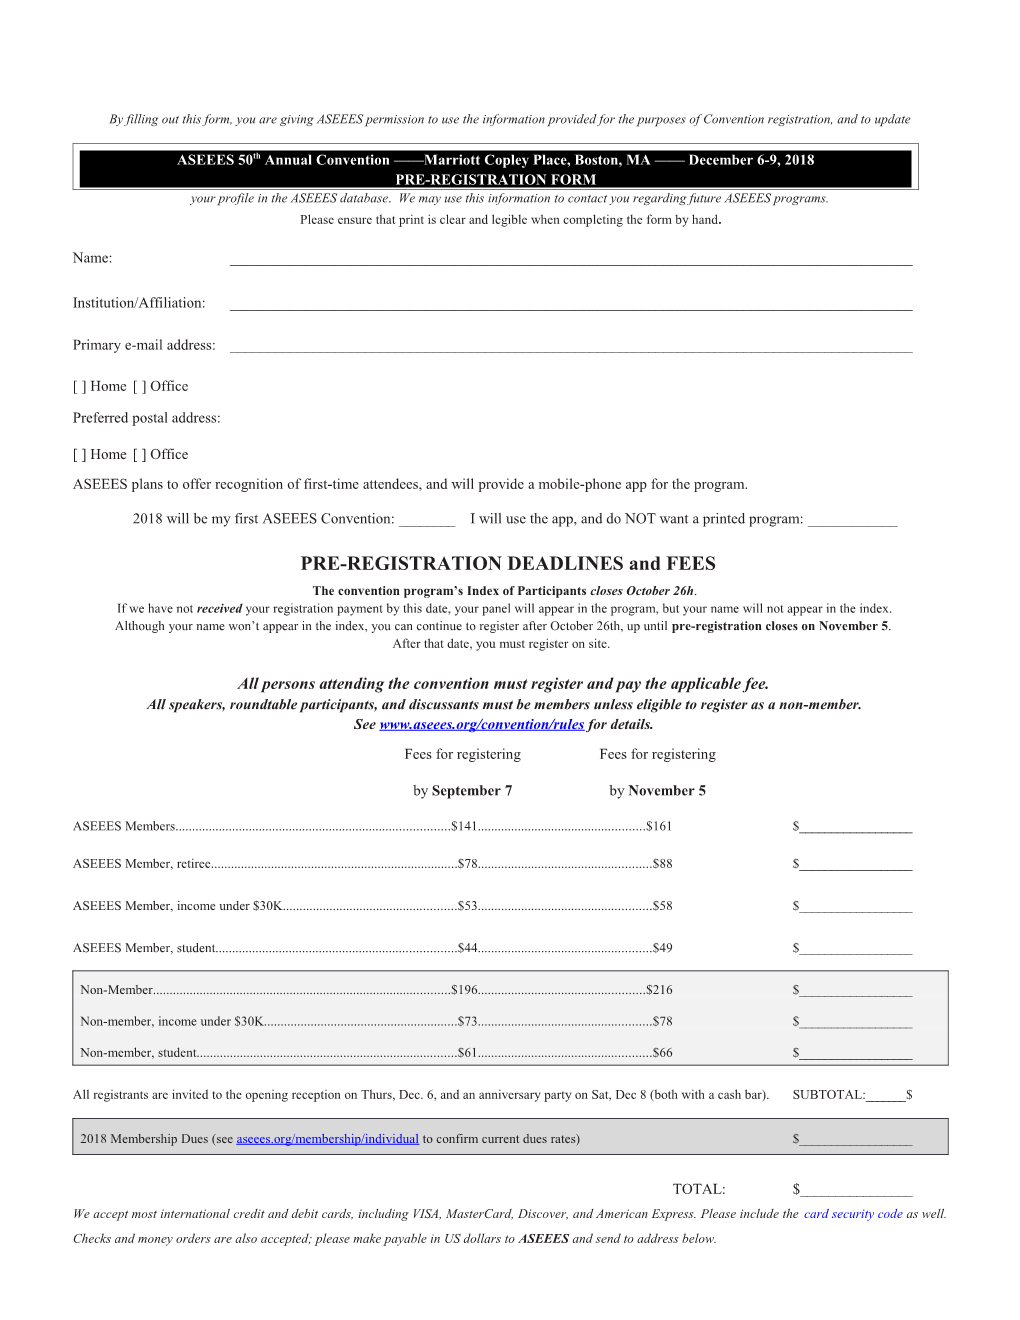 ASEEES Convention Preregistration Form (2011)